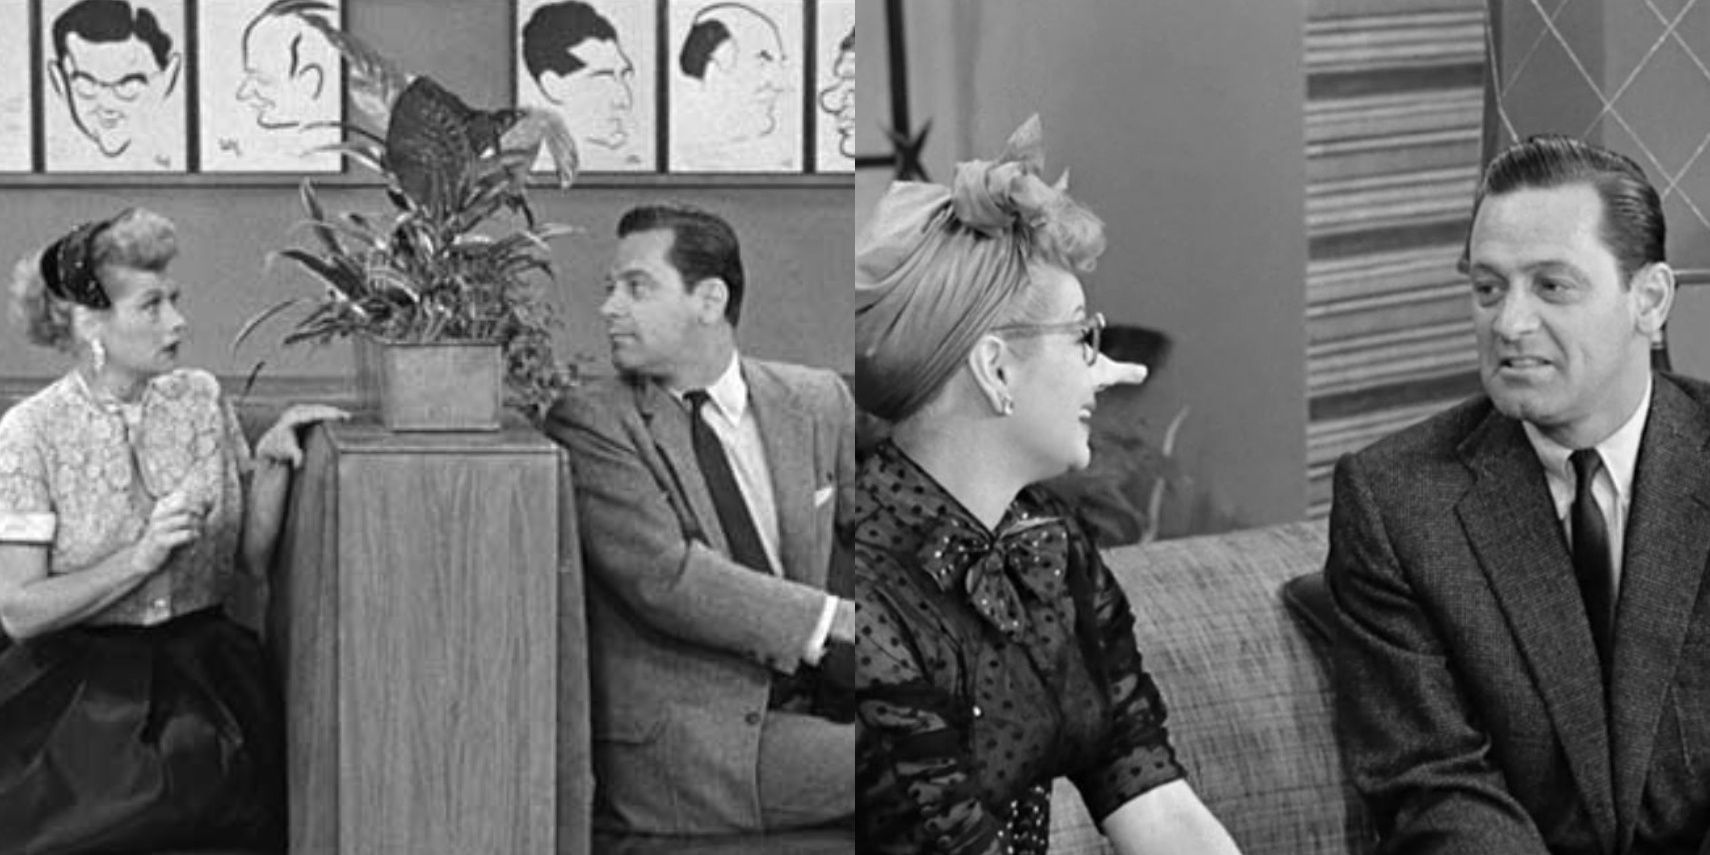 Lucy Ricardo (Lucille Ball) at William Holden at the Brown Derby restaurant; Lucy Ricardo with a fake nose disguise with William Holden in &quot;I Love Lucy.&quot;